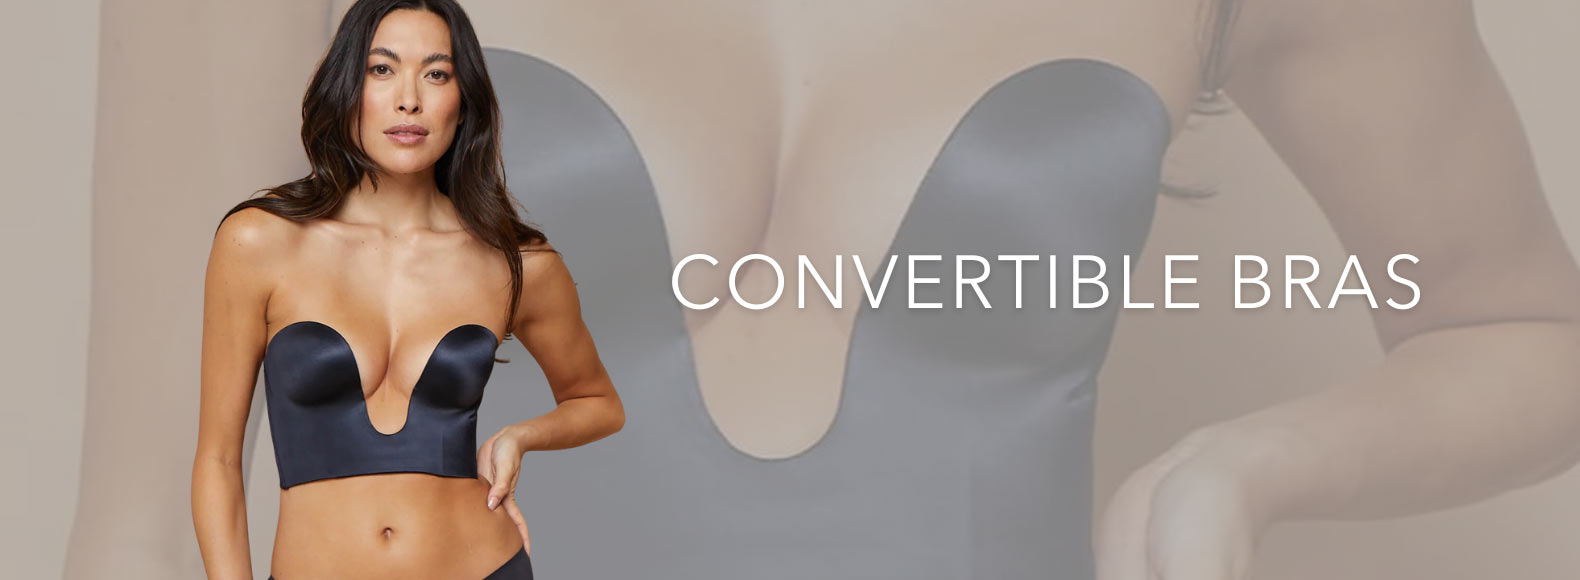 Convertible Bras Collections